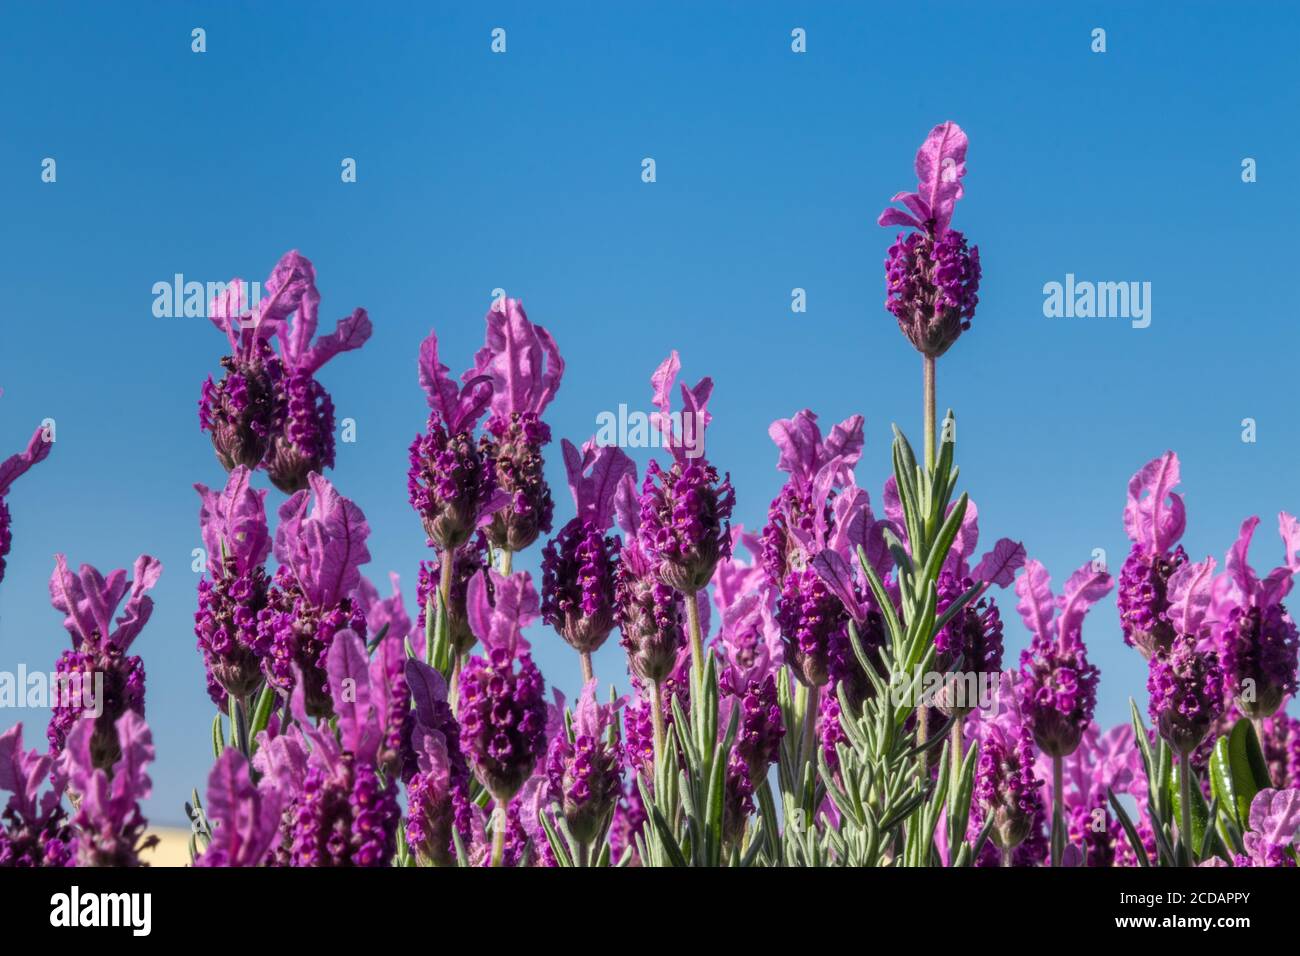 European lavender and its purple blooming flowers Stock Photo